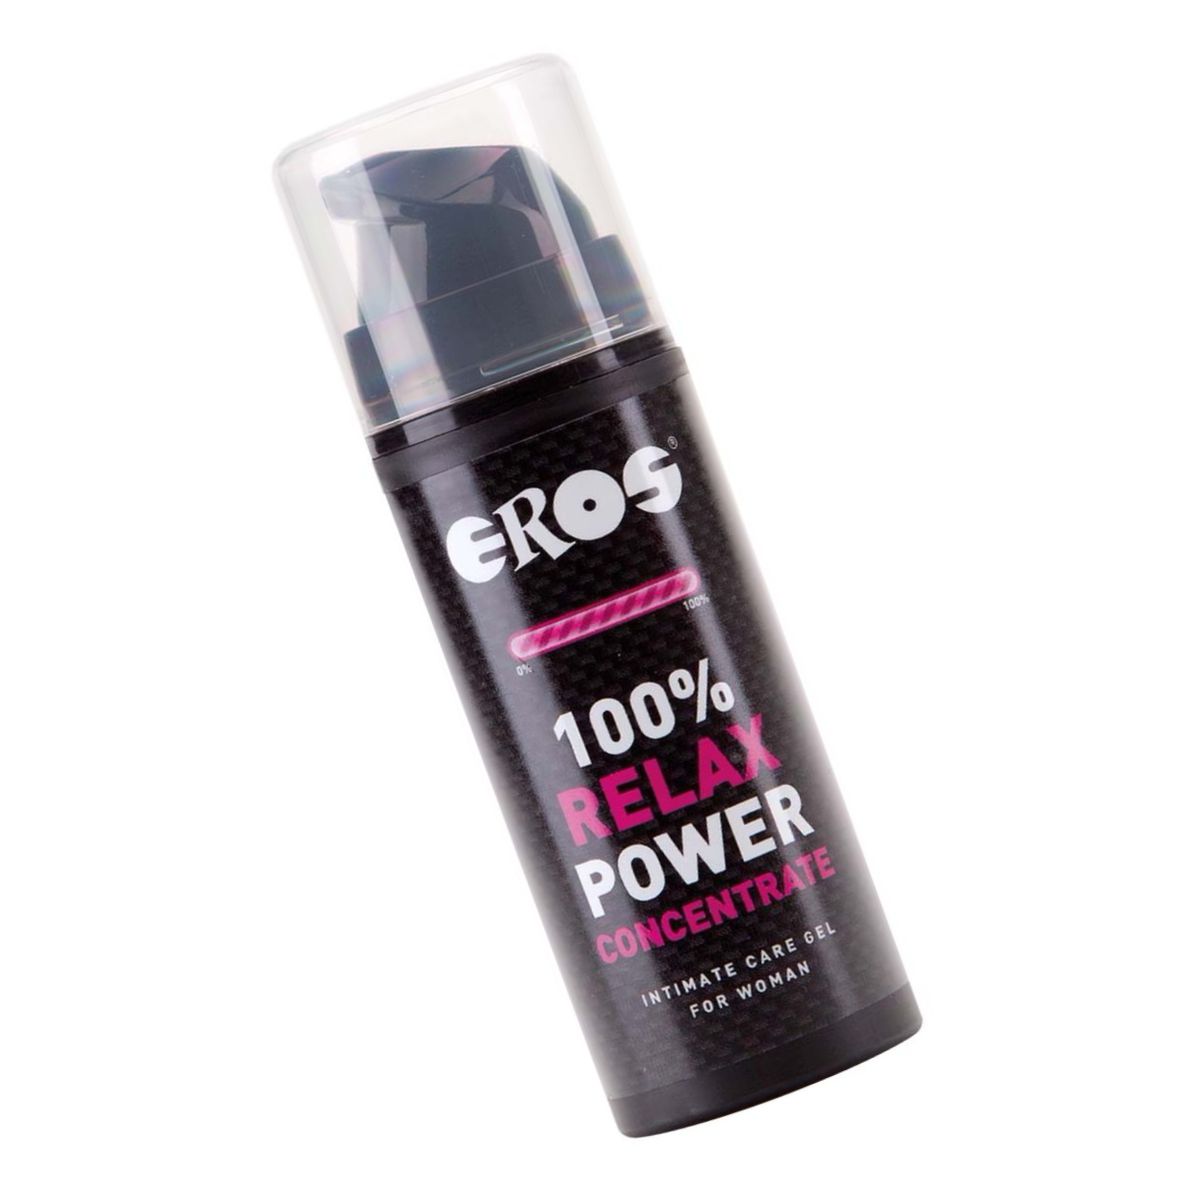 Lubrifiant Eros Relax  Power Concentrate 